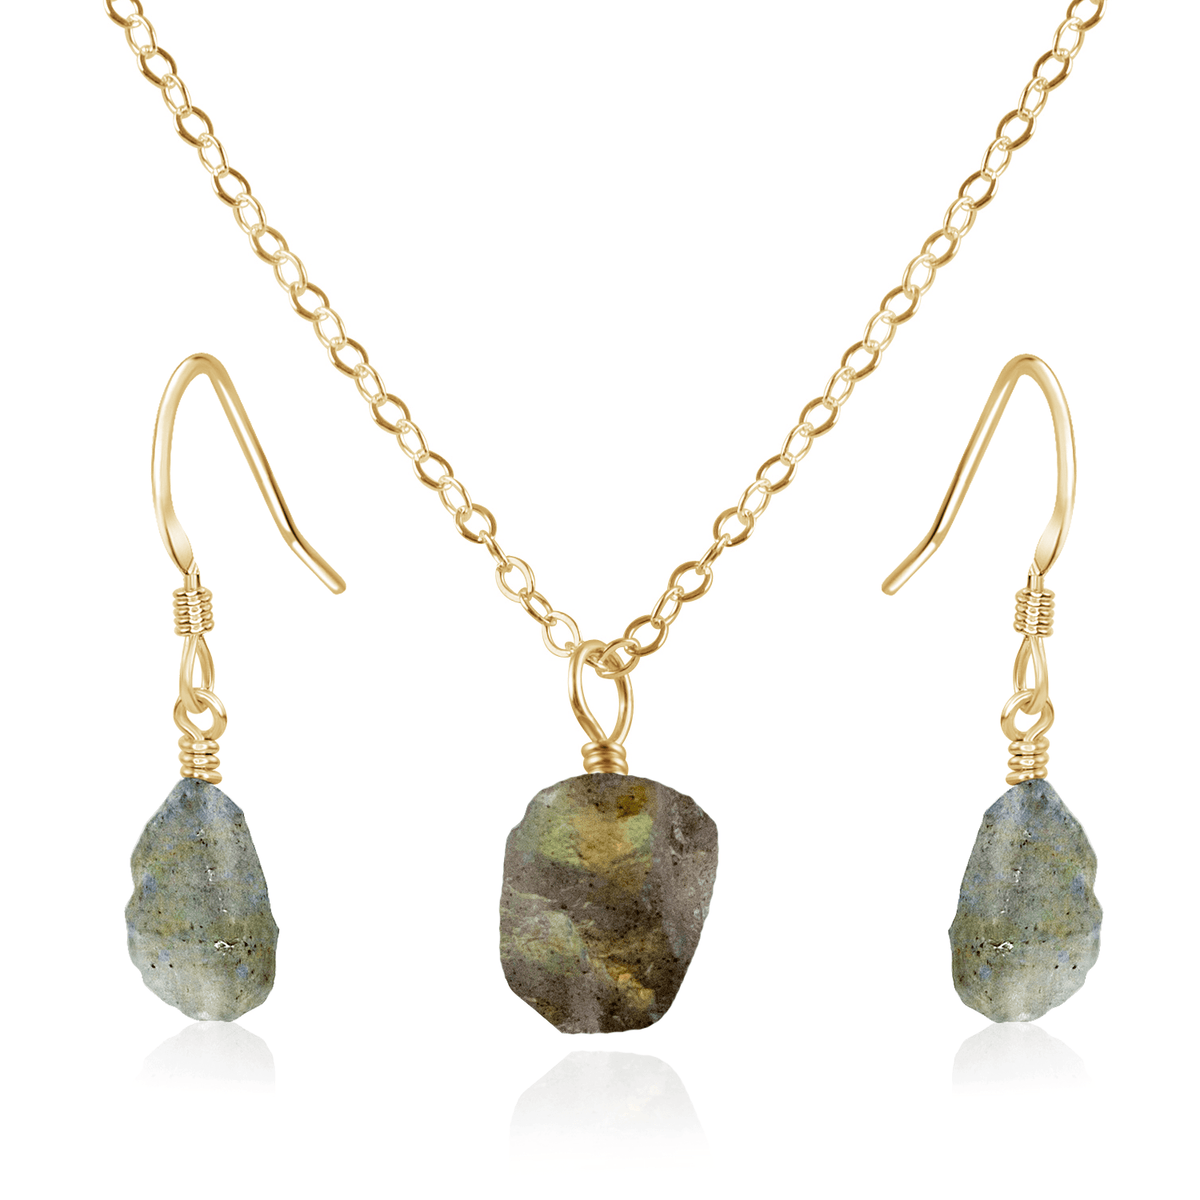 Raw Labradorite Crystal Earrings & Necklace Set - Raw Labradorite Crystal Earrings & Necklace Set - 14k Gold Fill / Cable - Luna Tide Handmade Crystal Jewellery